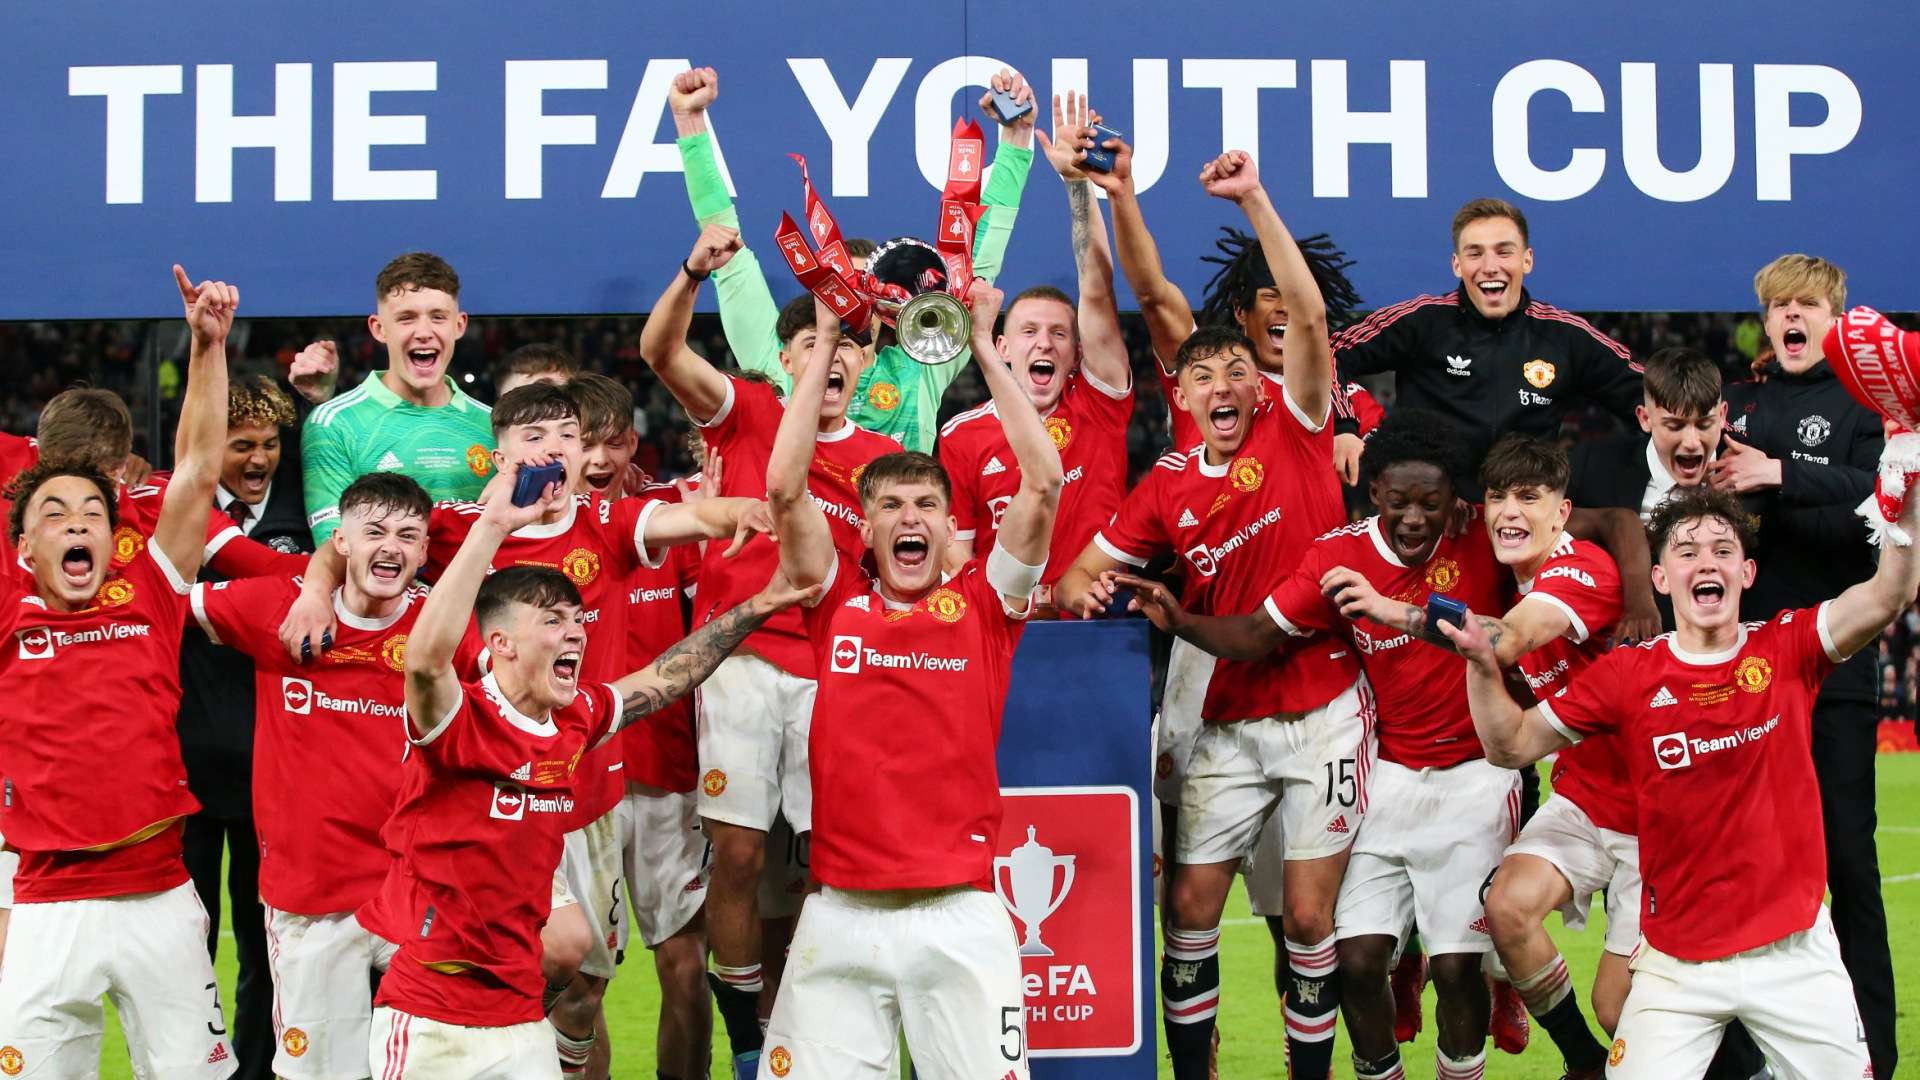 Manchester United U23 FA Youth Cup